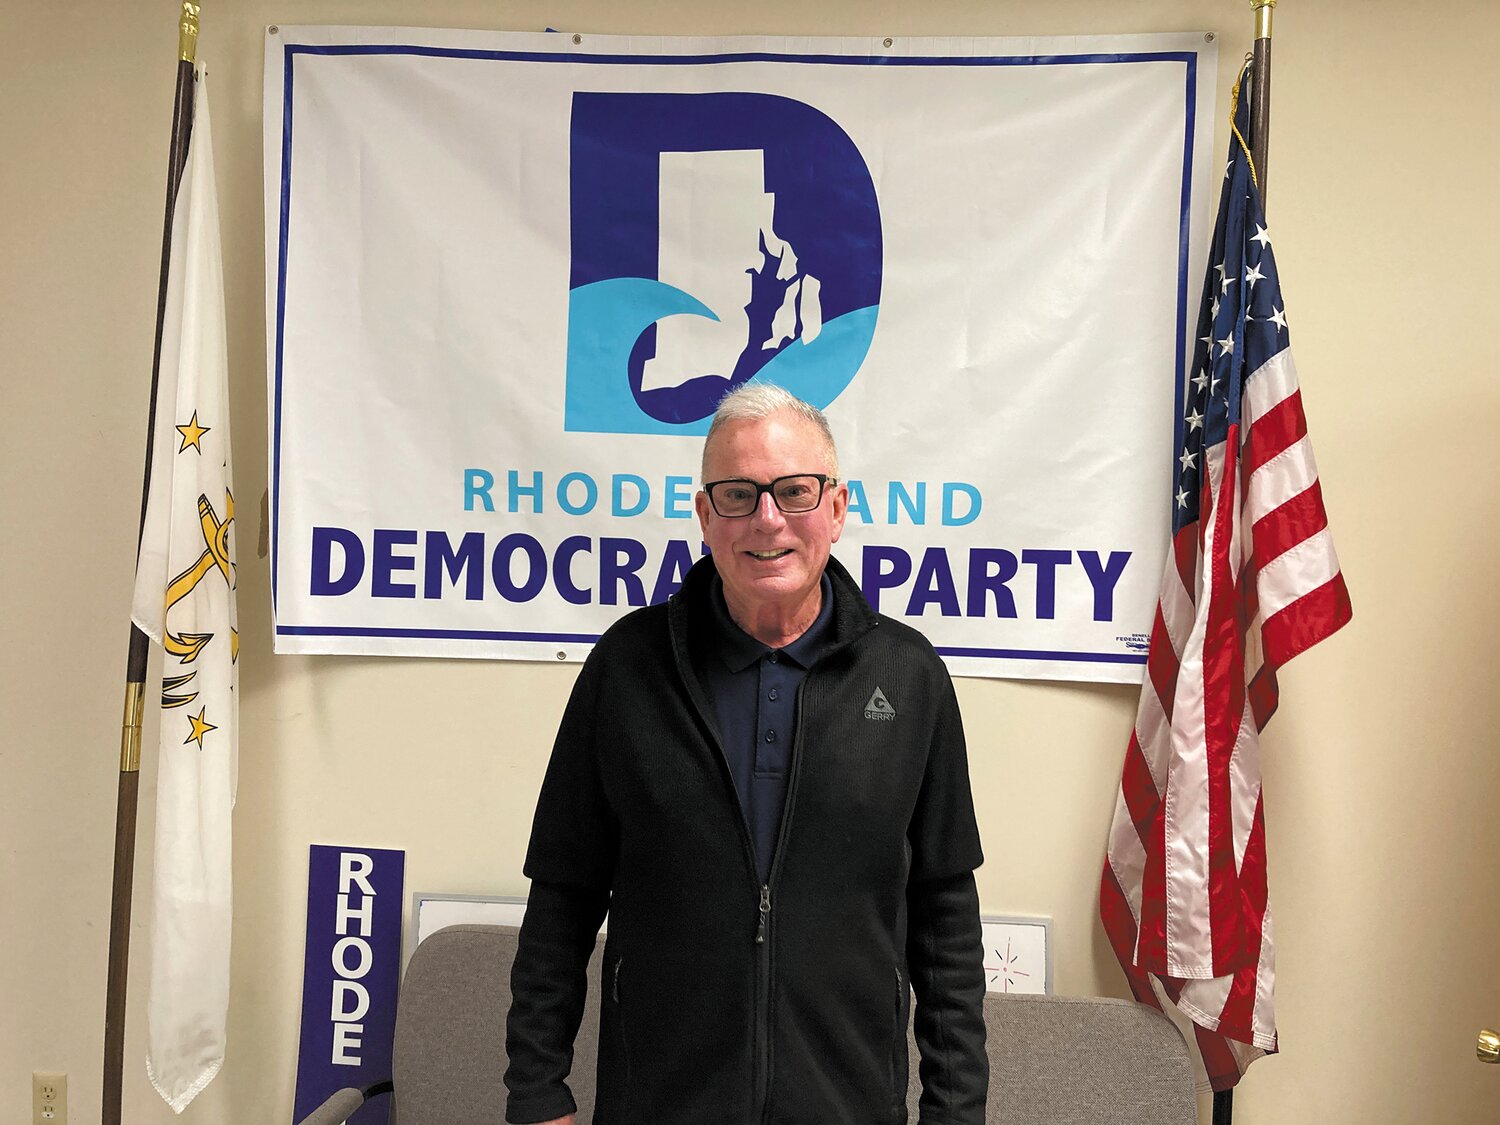 A PARTY MAN: McNamara stands in the Rhode Island Democratic Party’s Warwick office, which still bore signs of celebration from Gabe Amo’s victory earlier that week.